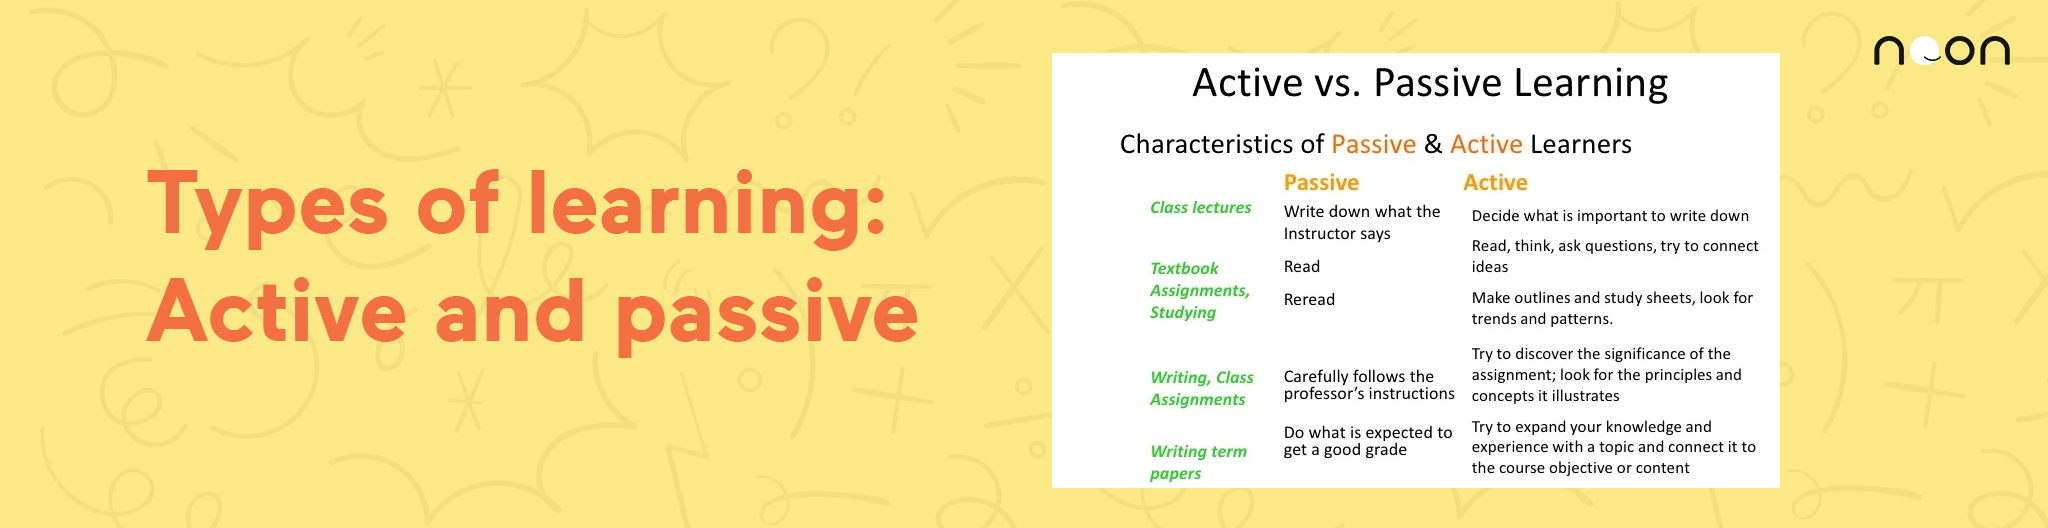 Types of learning: Active and passive